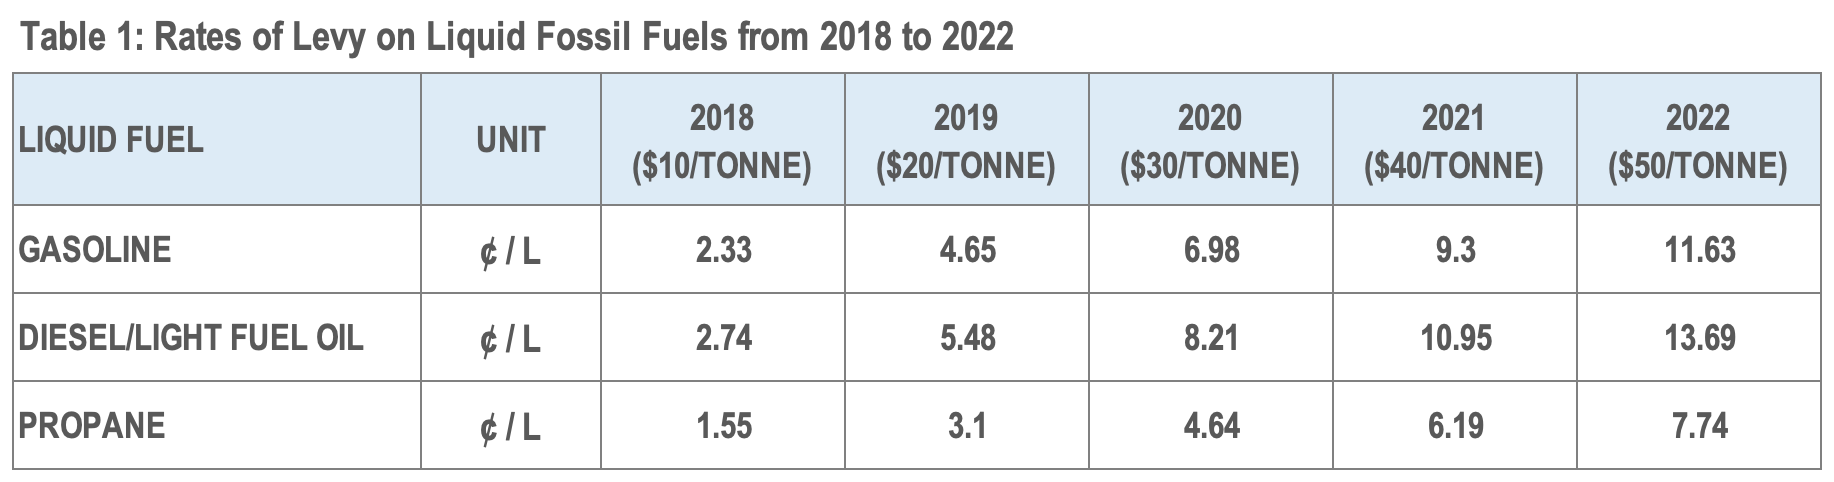 Chart showing the rates of levy on liquid fossil fuels from 2018 to 2022